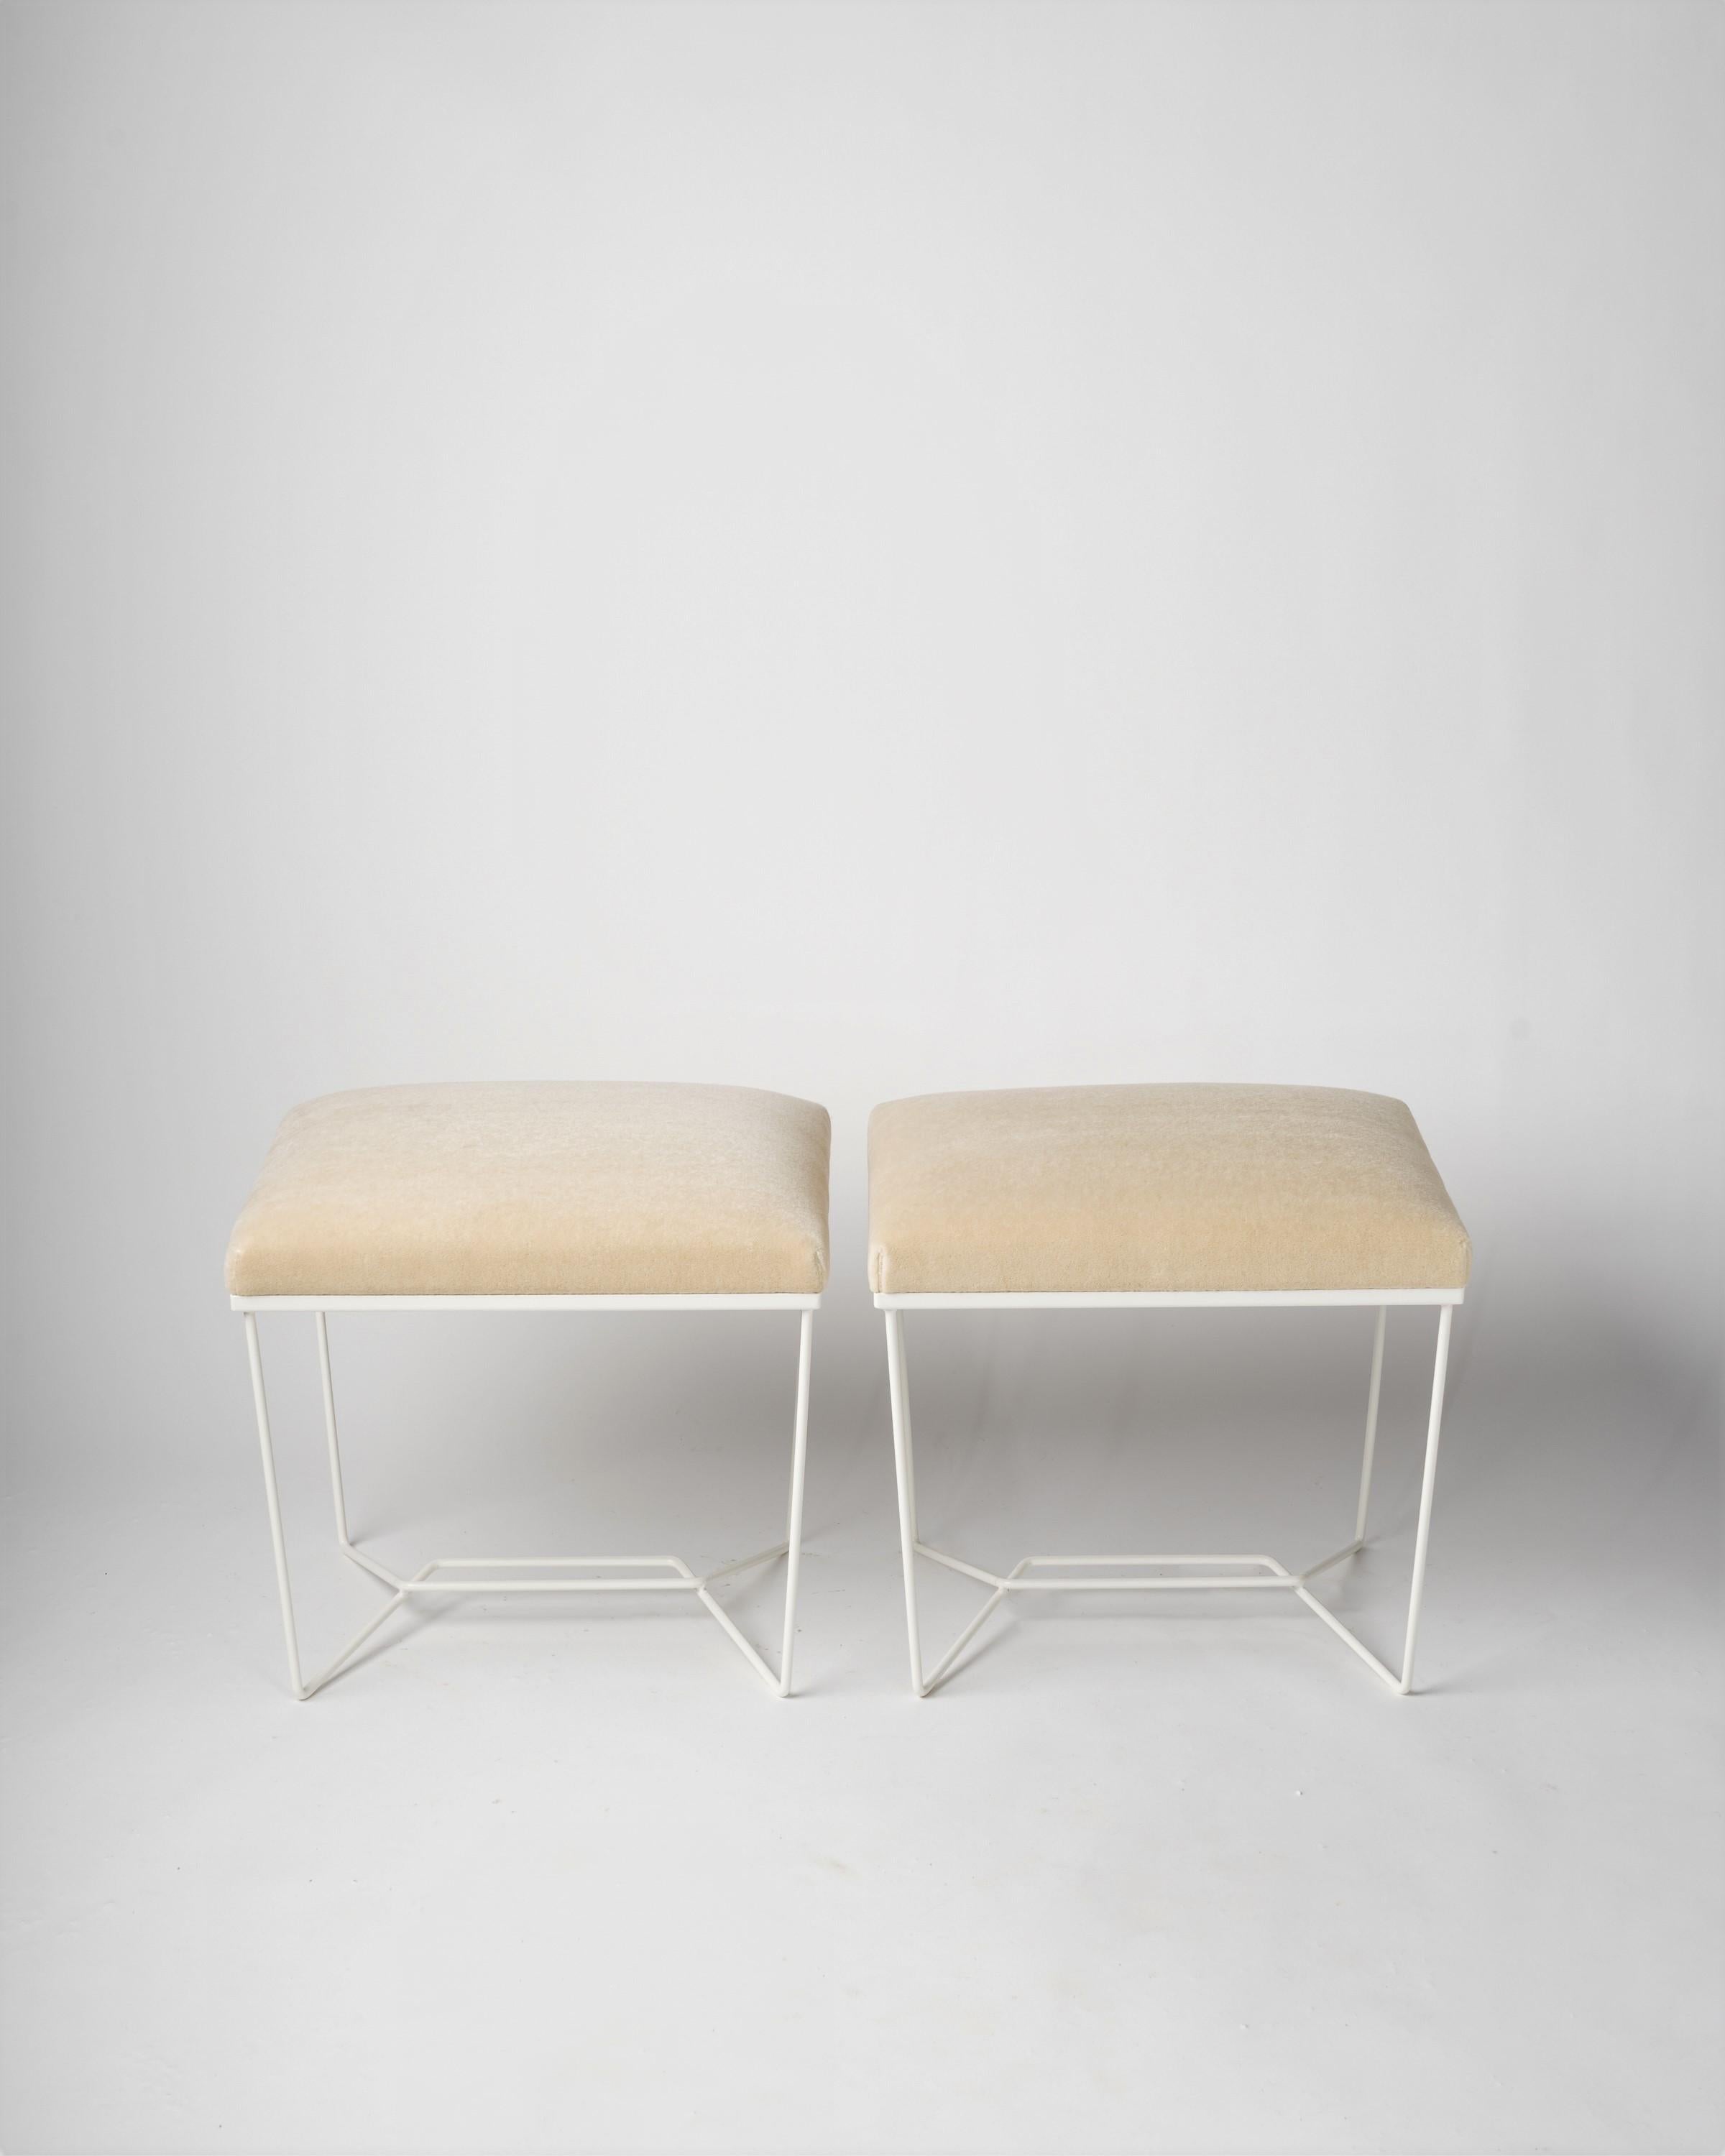 Trombone benches by Facto Atelier Paris, current production. Featured with a white enameled steel base with creme white Pierre Frey mohair upholstery, available now. 

Leg/base color and upholstery can be customized. 
